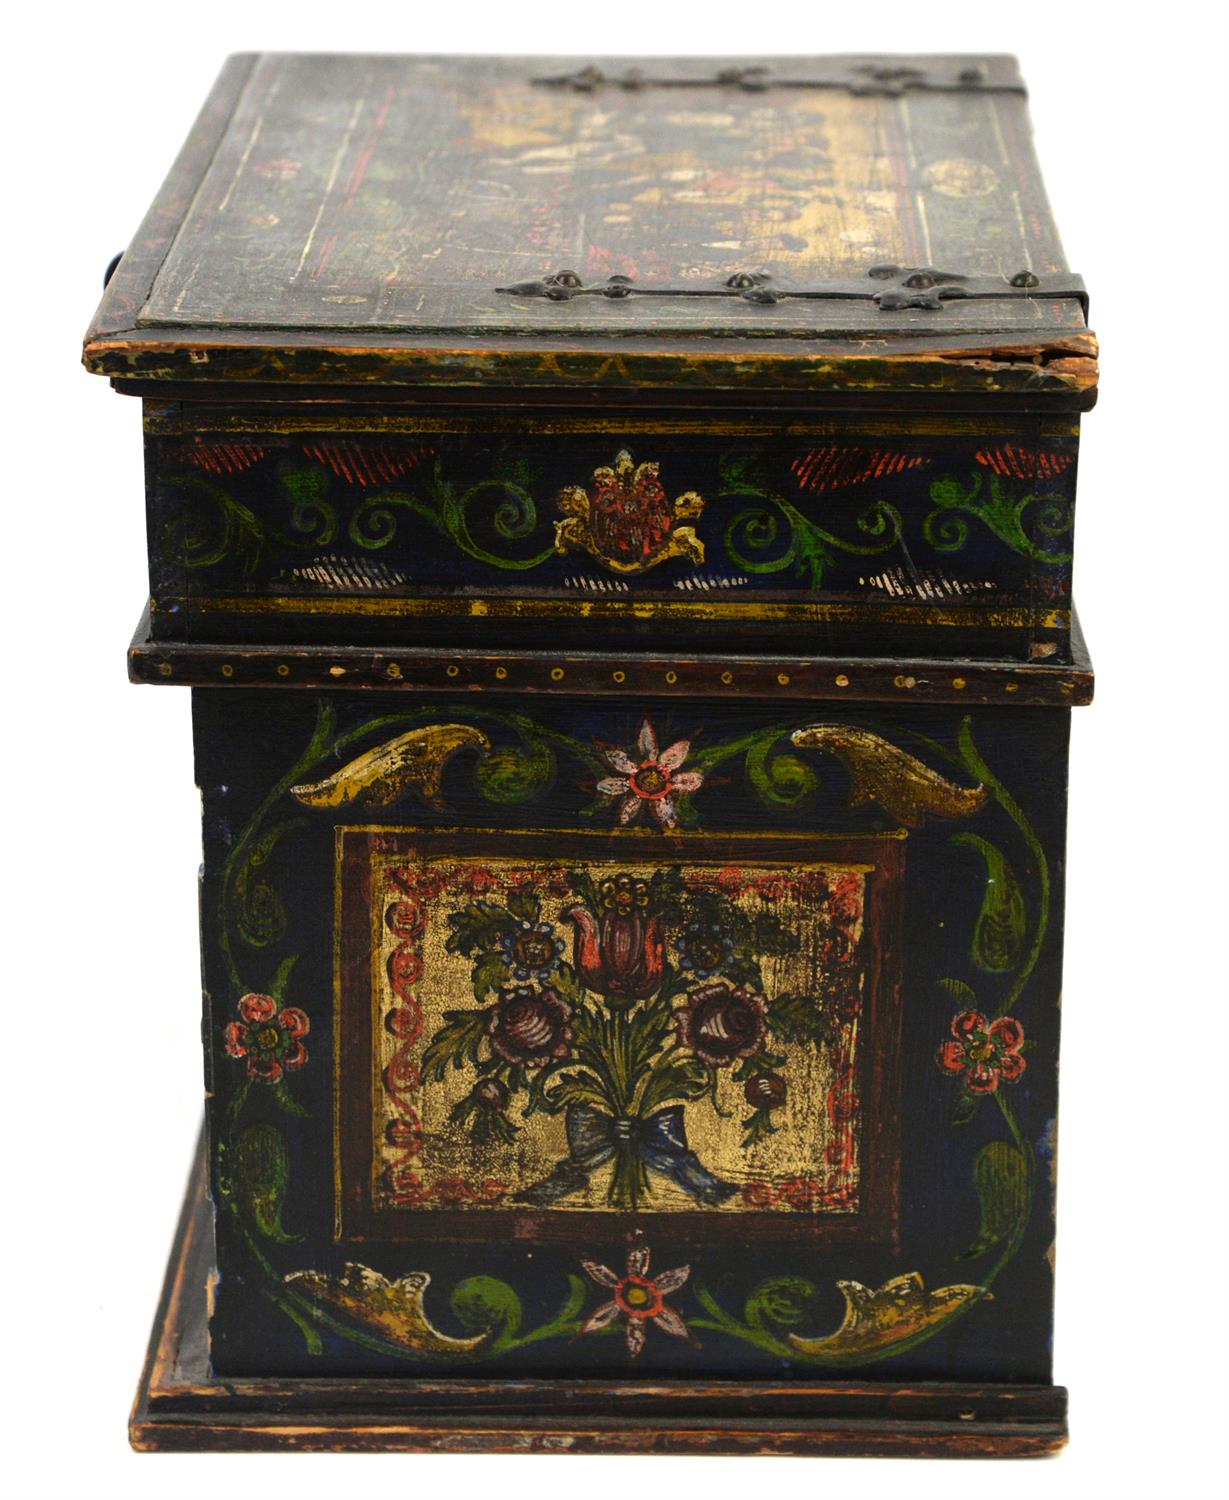 German wooden jewellery box painted with figures and flowers, with hinged lid revealing fitted - Image 4 of 5